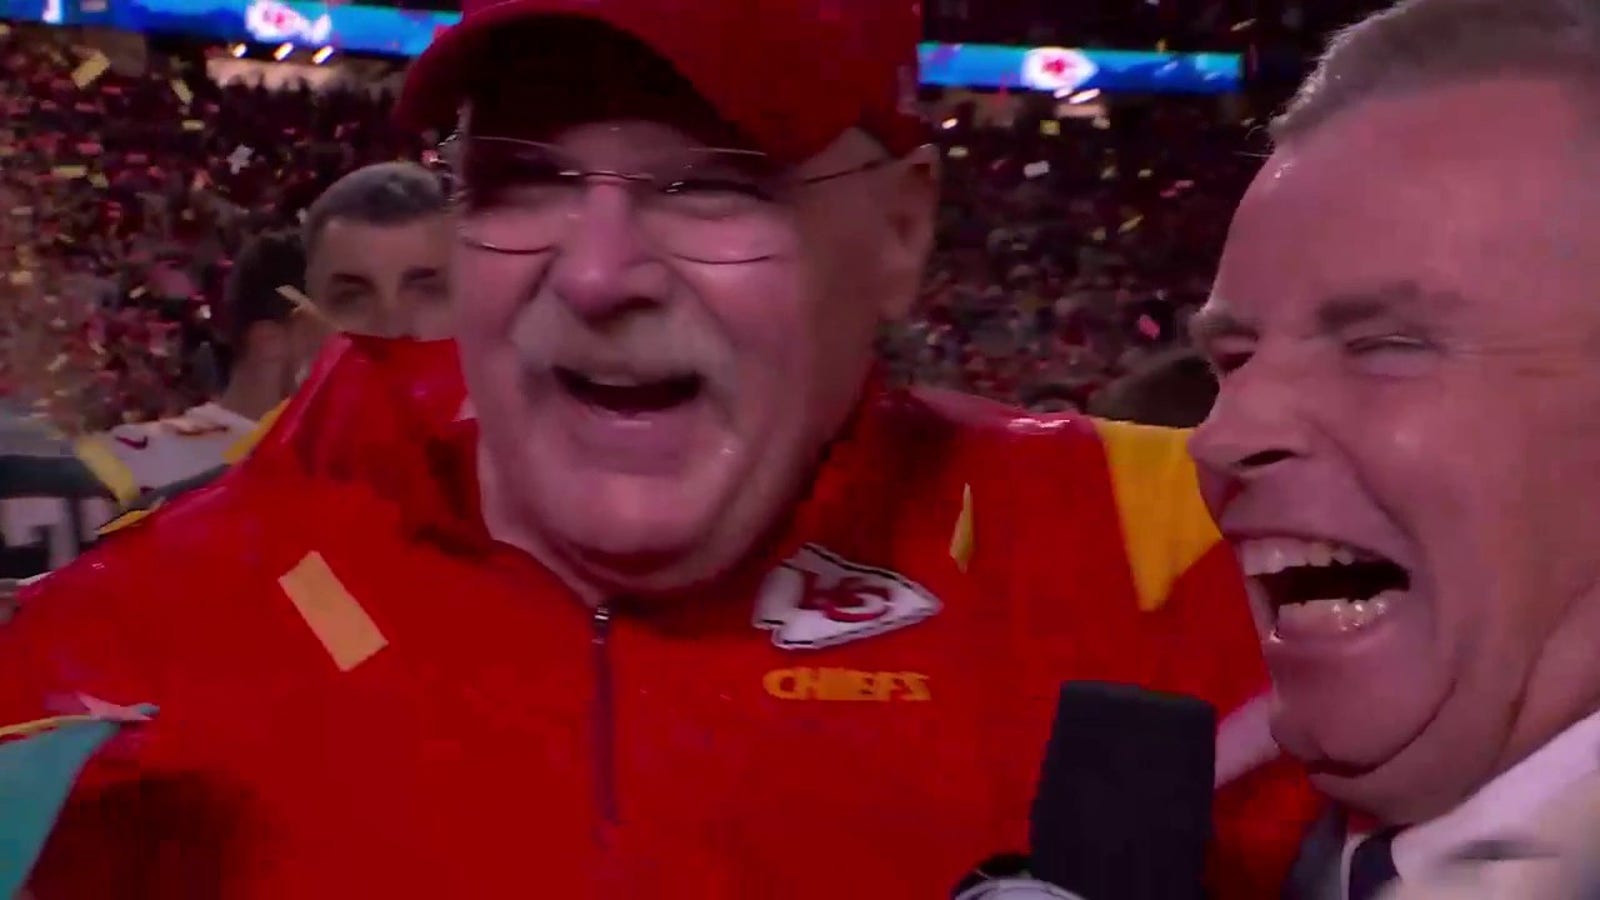 'Mahomes is the MVP, that's all there is to say' - Andy Reid on Captain Beating the Eagles